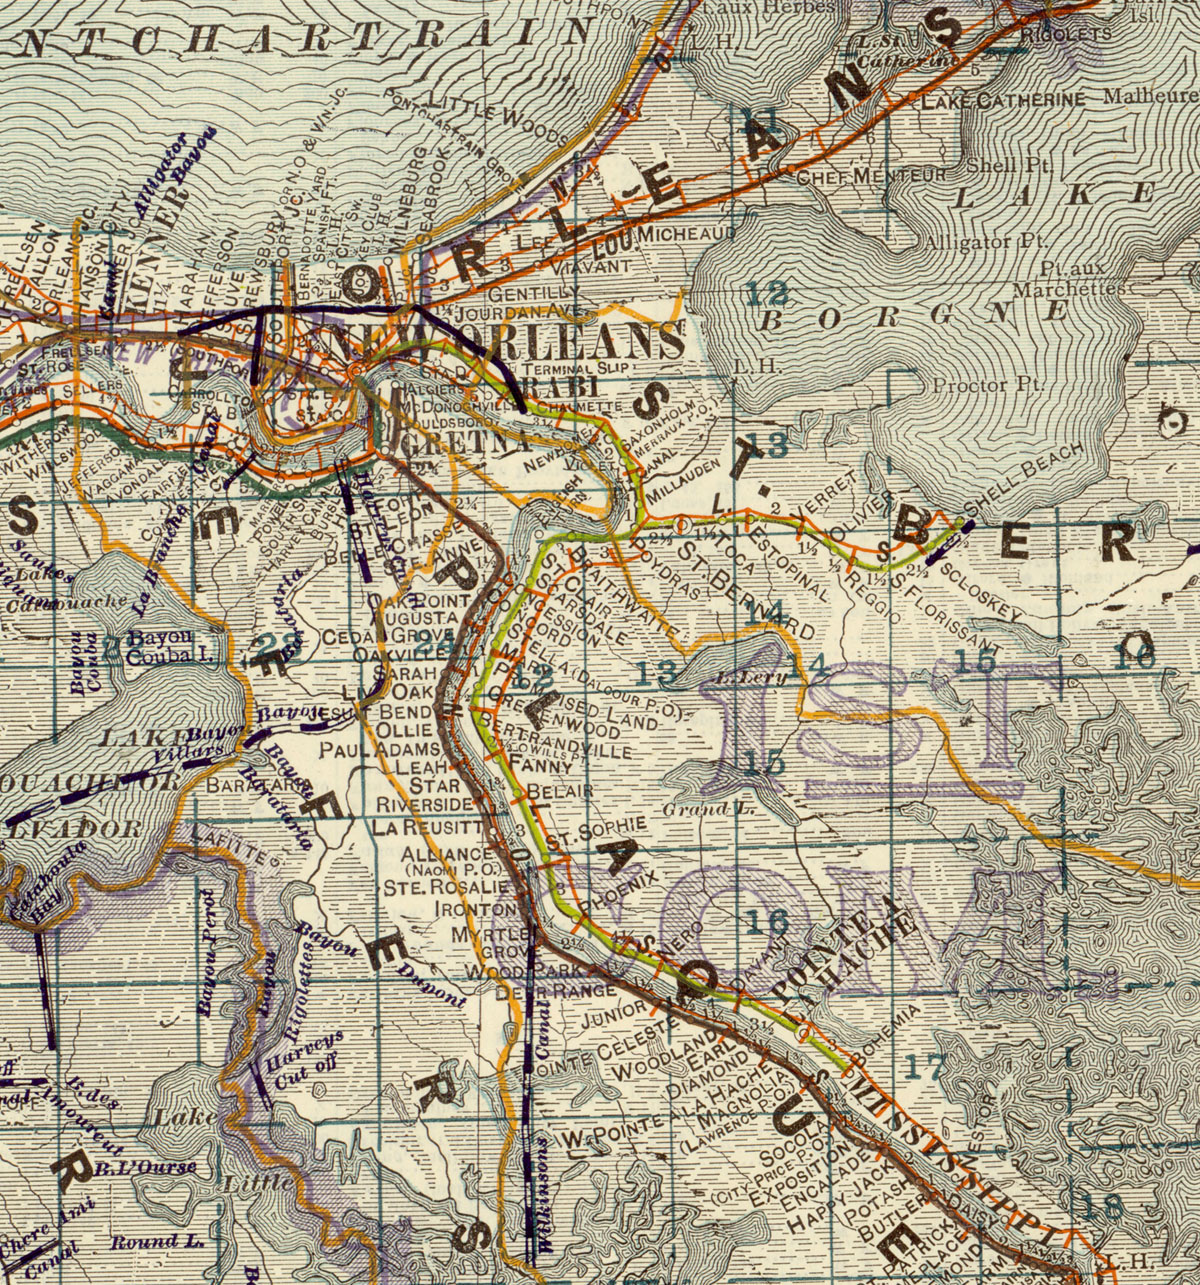 Louisiana Southern Railway Company (La.), Map Showing Route in 1922.